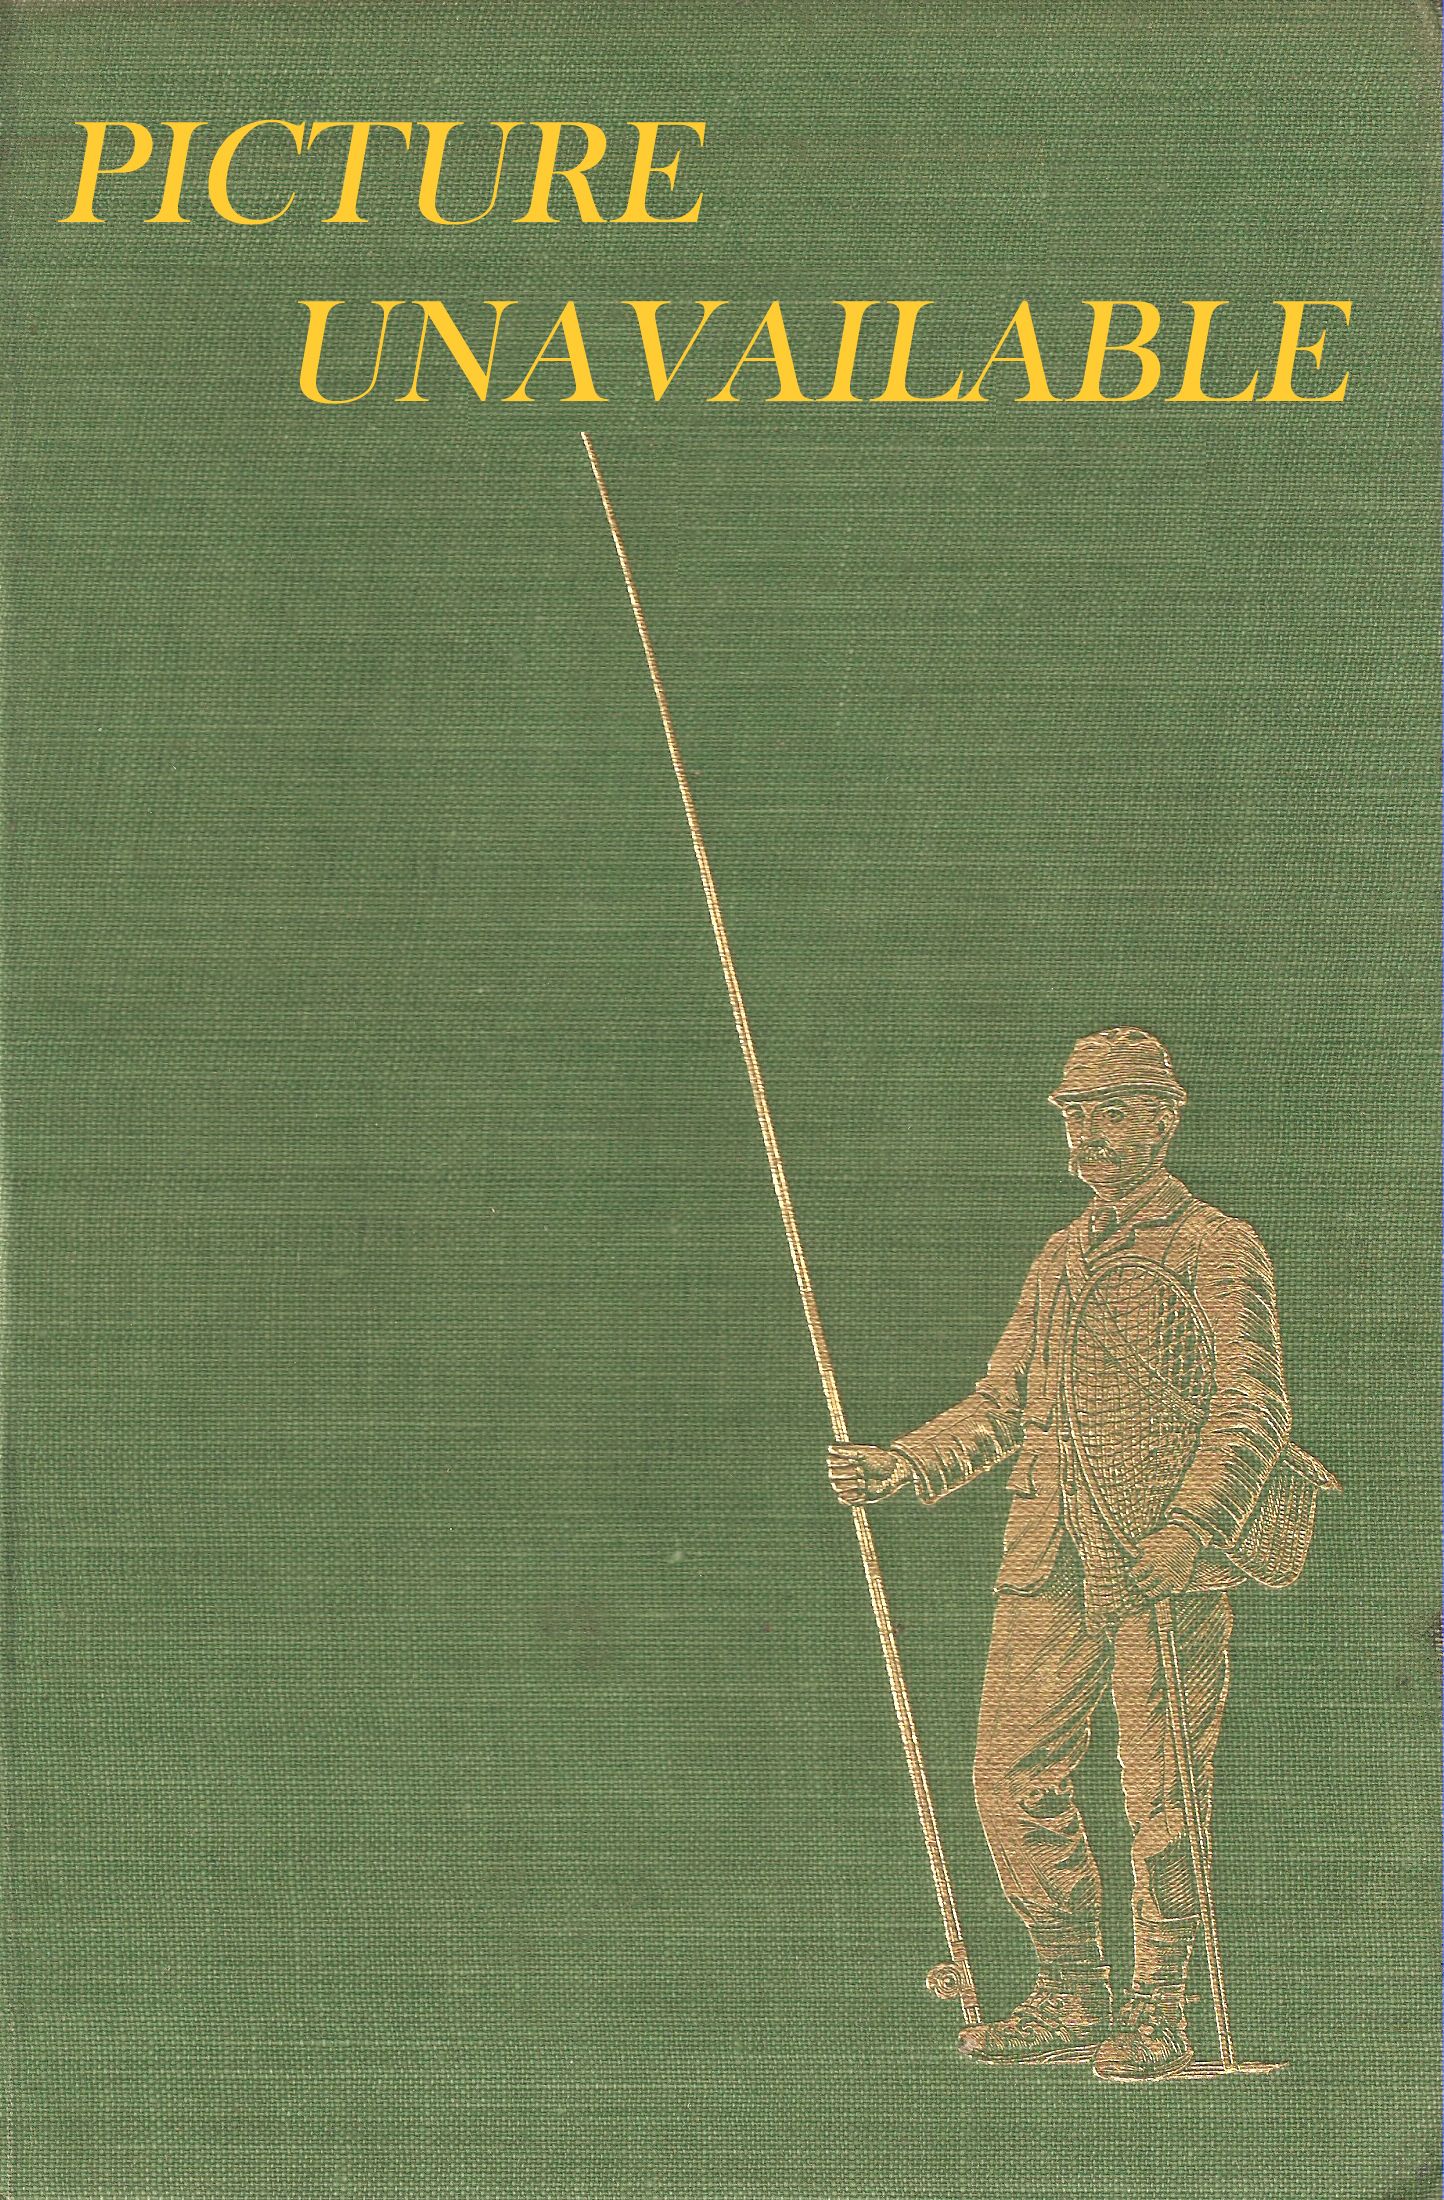 THE COMPLEAT ANGLER. Introduction by Margaret Bottrall, M.A., and an essay on the author by Andrew Lang.